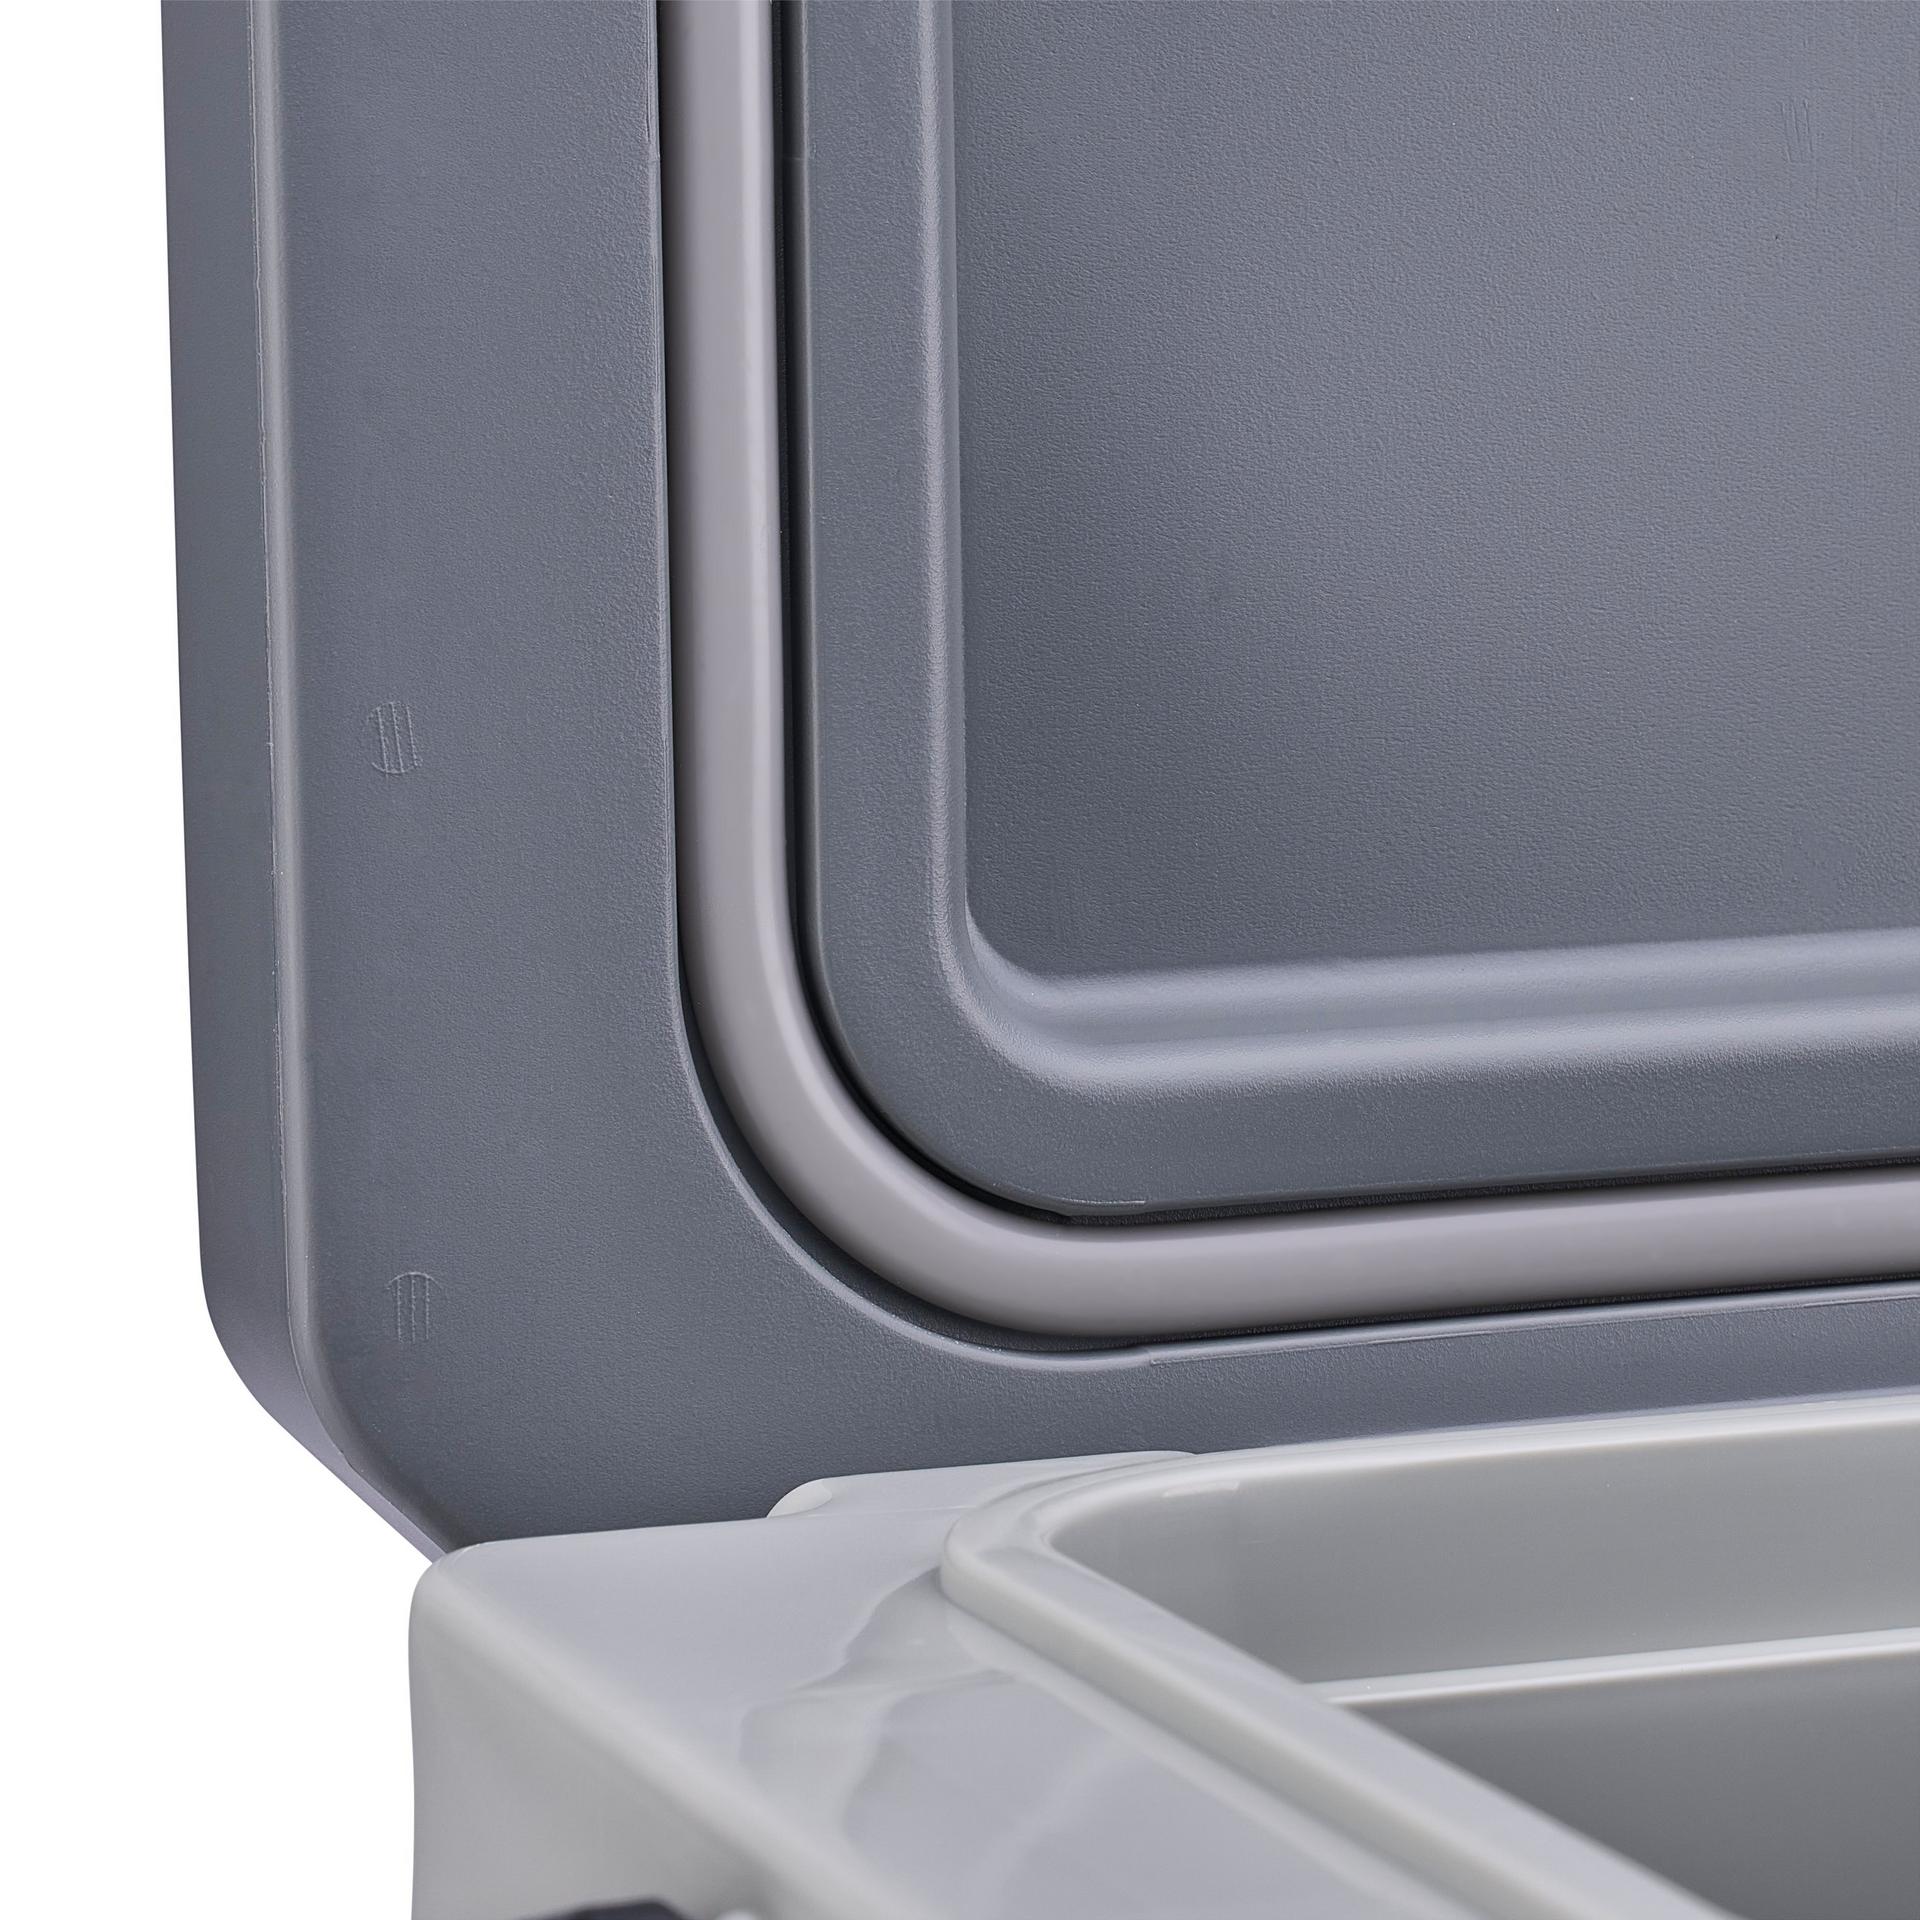 Frost Cooler 14 Quart (13 L) | Plano®